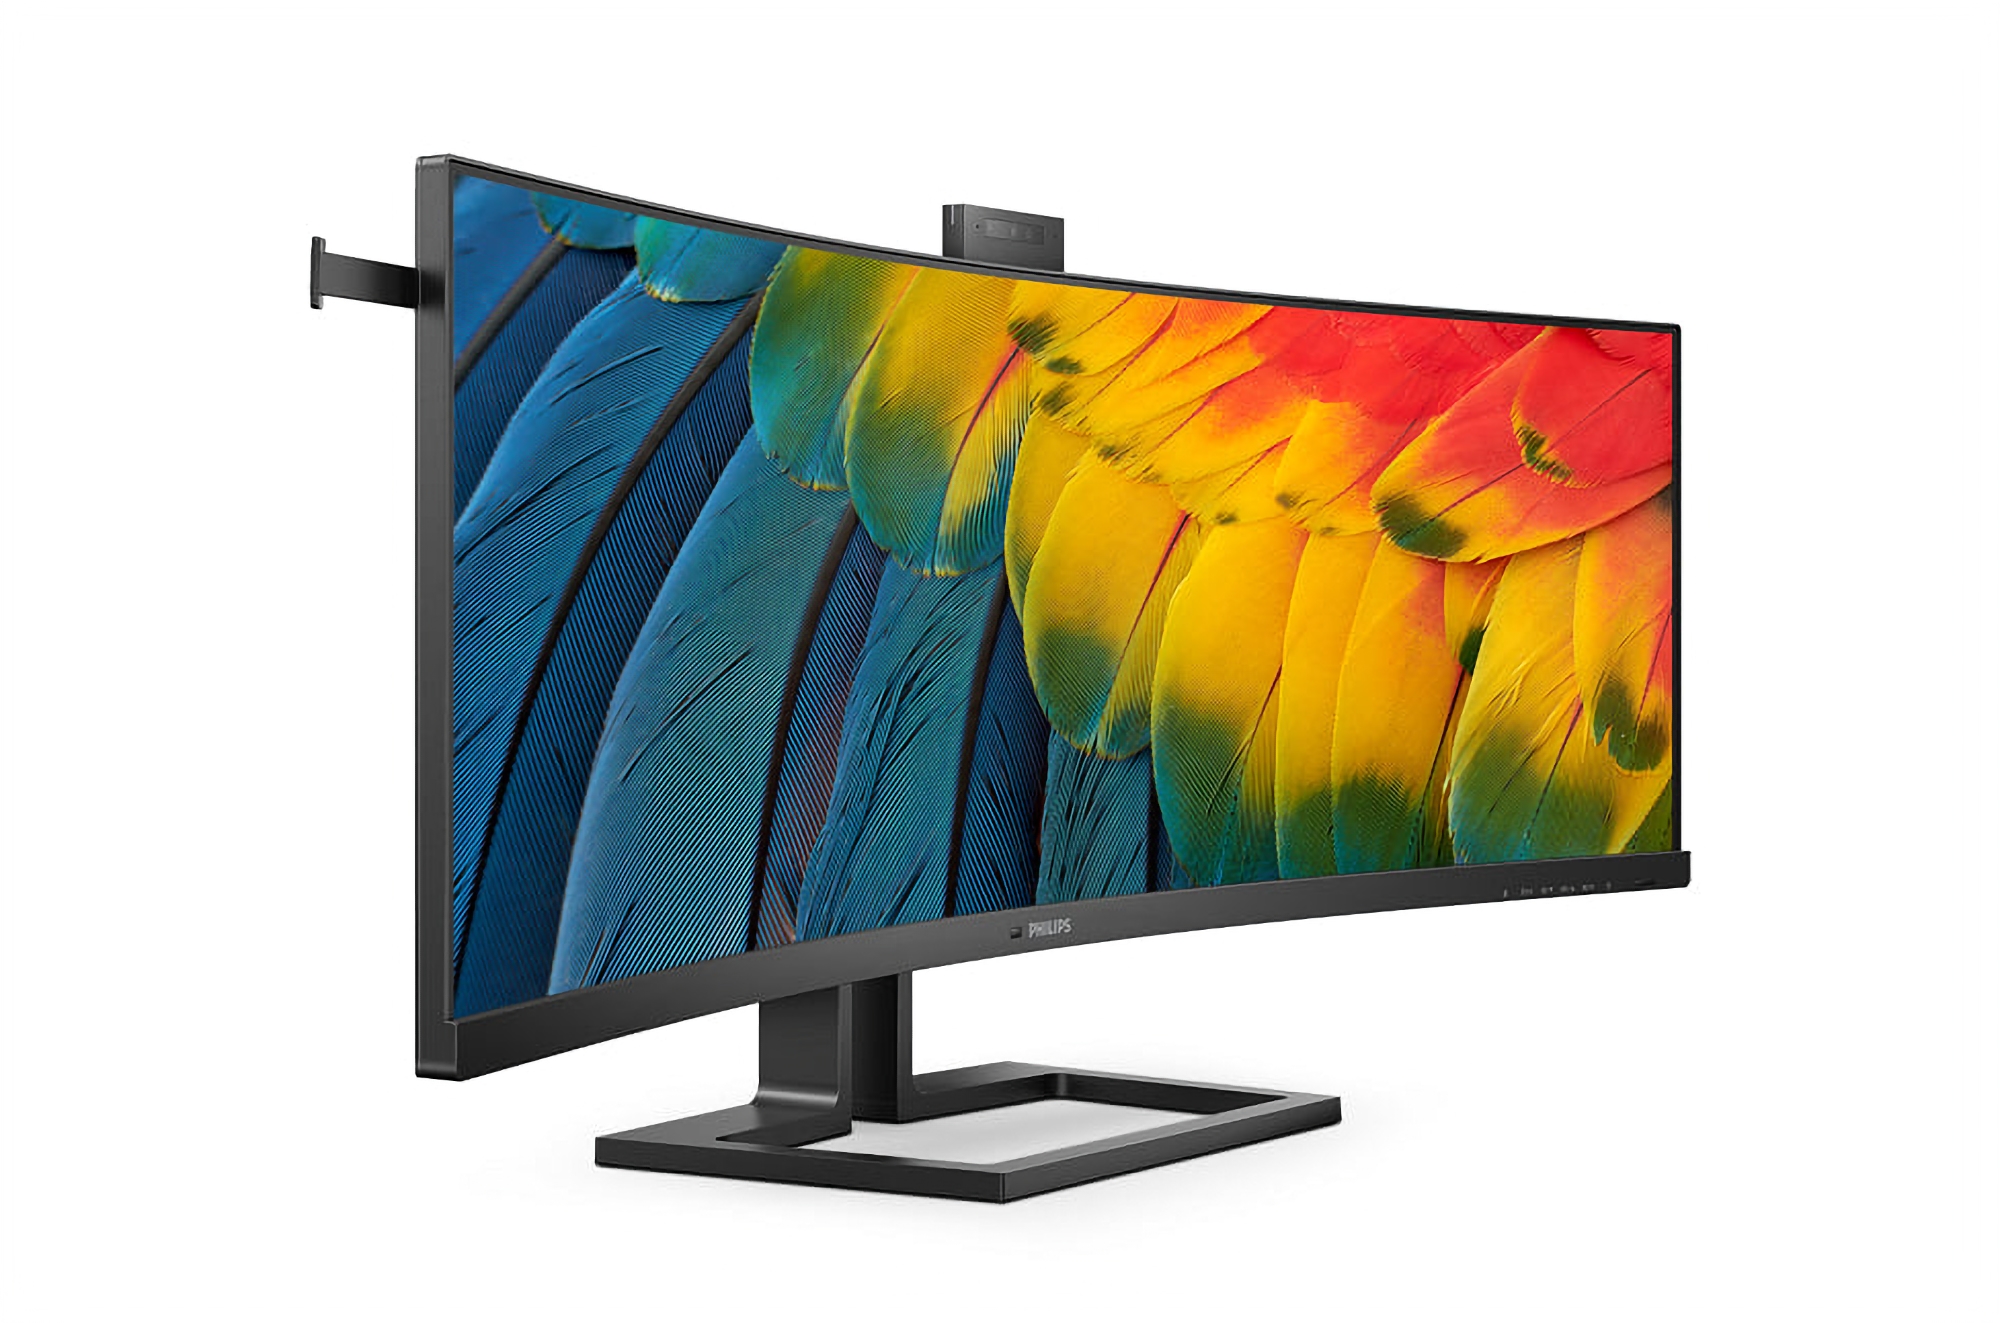 Philips introduces 40B1U6903CH: 40" monitor with 5K curved display and built-in webcam